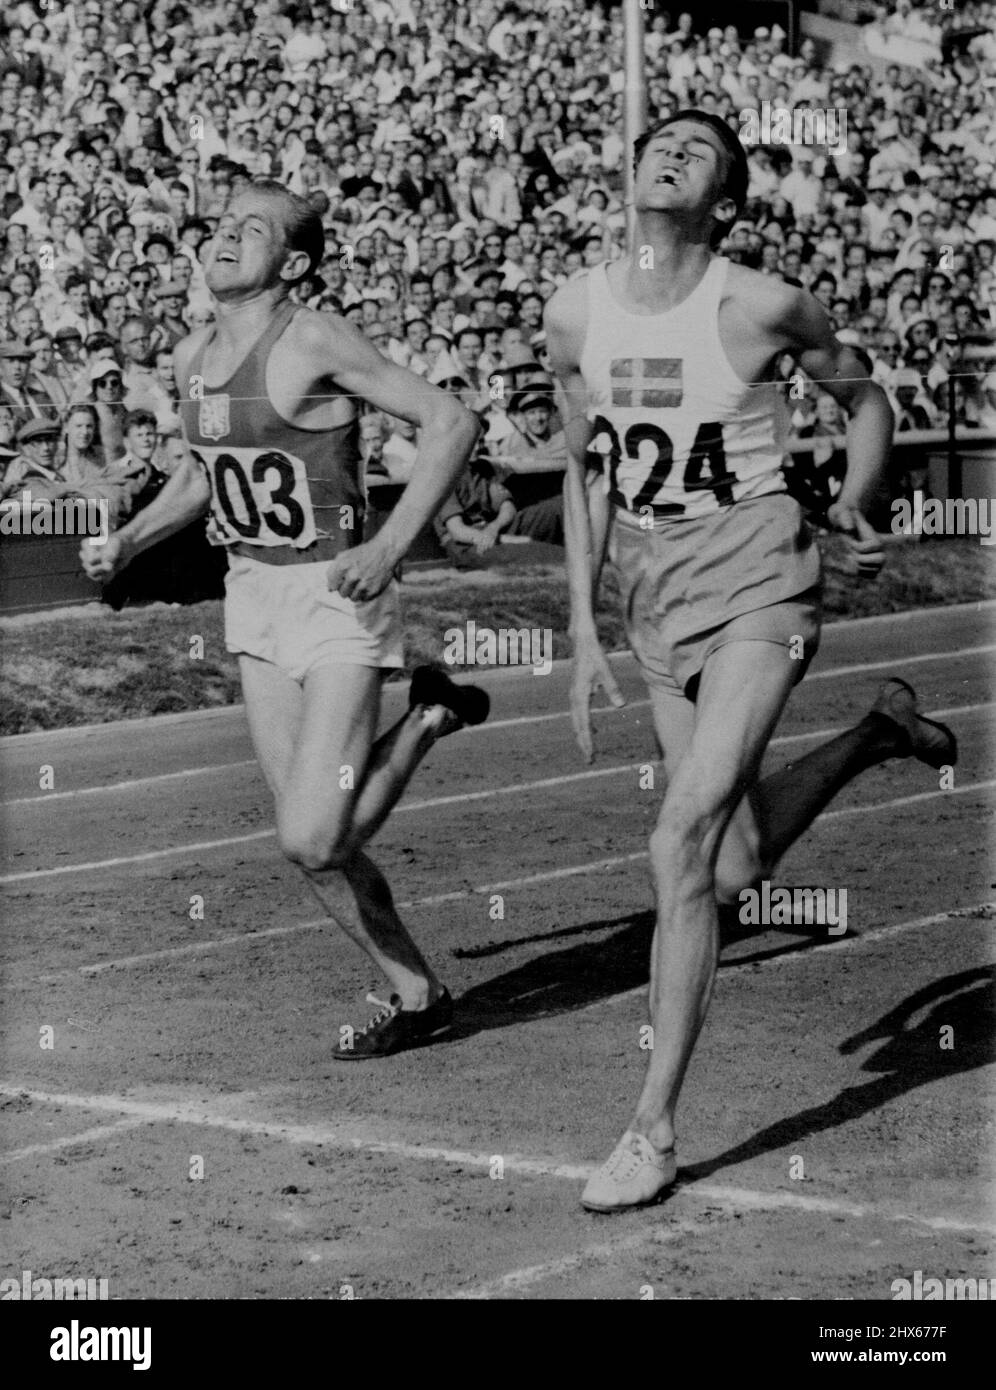 Swede Wins Heat 2 Of 5000 Metres -- E. Ahlden (224) of Sweden, scores a close victory over Czechoslovakia's Emil Zatopek (203) in heat 2 of the 5000 metres race of the 1948 Olympic Games at Wembley Stadium, London, today, July 31. Winner's time: 14 mins. 34.2 seconds. These two qualify with V.I. Makela (Finland) and M. Stokken (Norway), neither of whom is pictured, to contest the final of the event on Monday August 2. August 17, 1948. (Photo by Olympic Photo Association Photo). Stock Photo